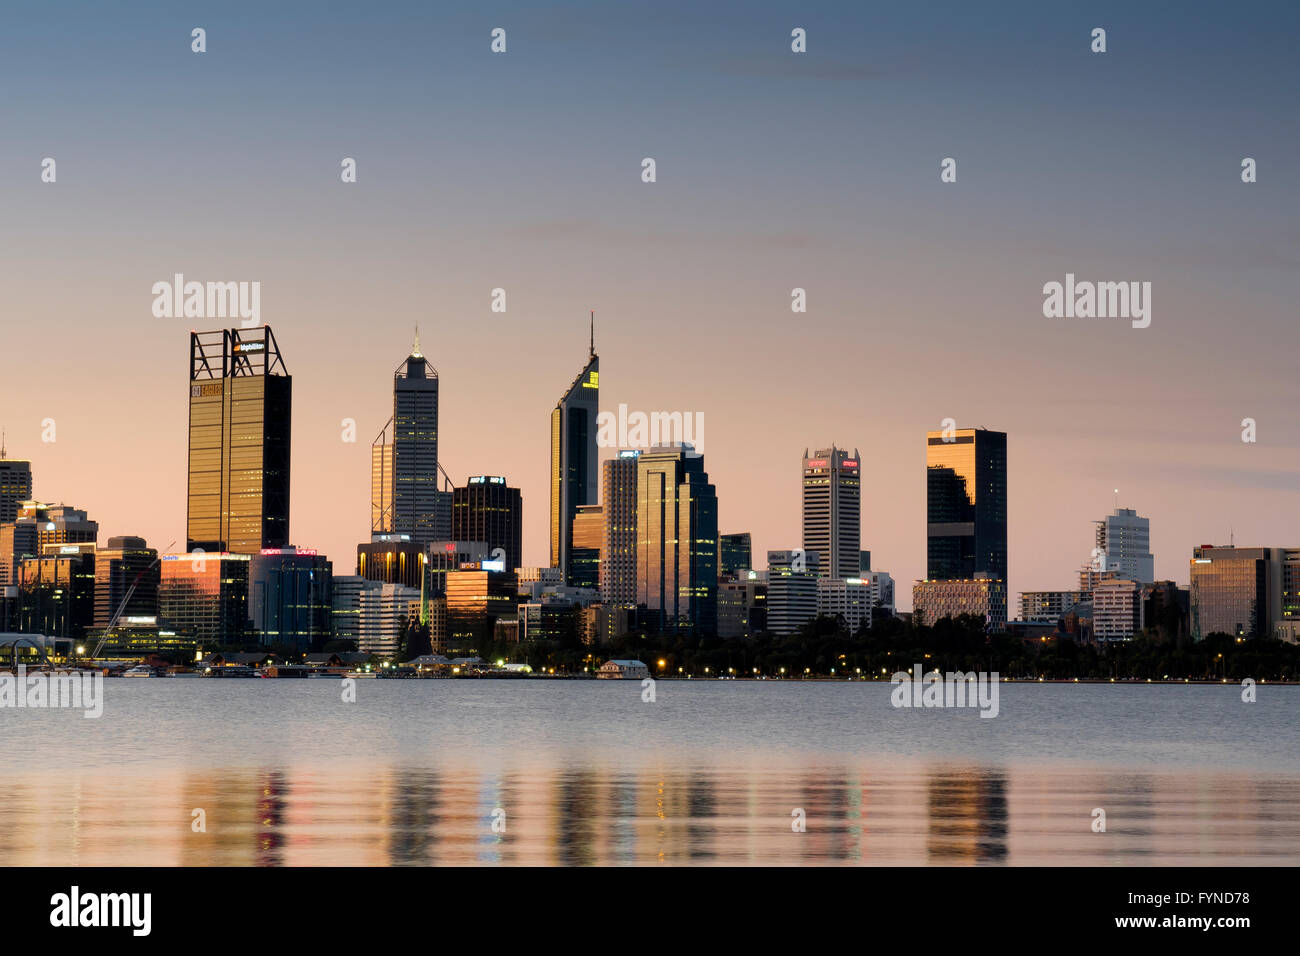 The City of Perth at Sunset across the Swan River, Western Australia Stock Photo